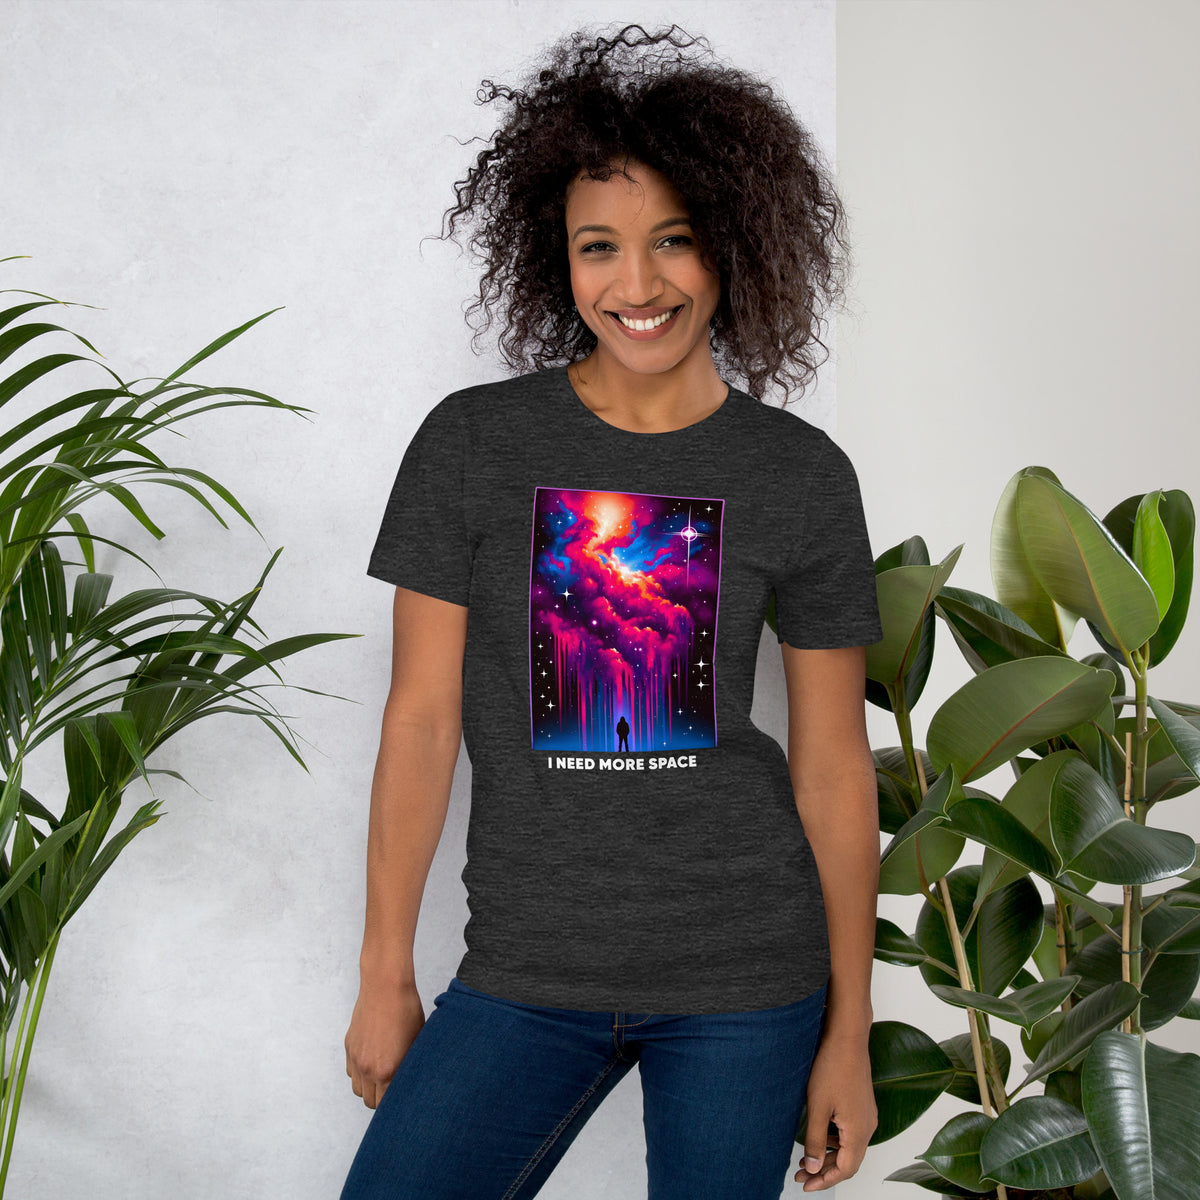 I Need More Space Shirt, Humorous Astronomy Pun Tee, Star Galaxy Design, Funny Gift for Space Lovers and Science Enthusiasts